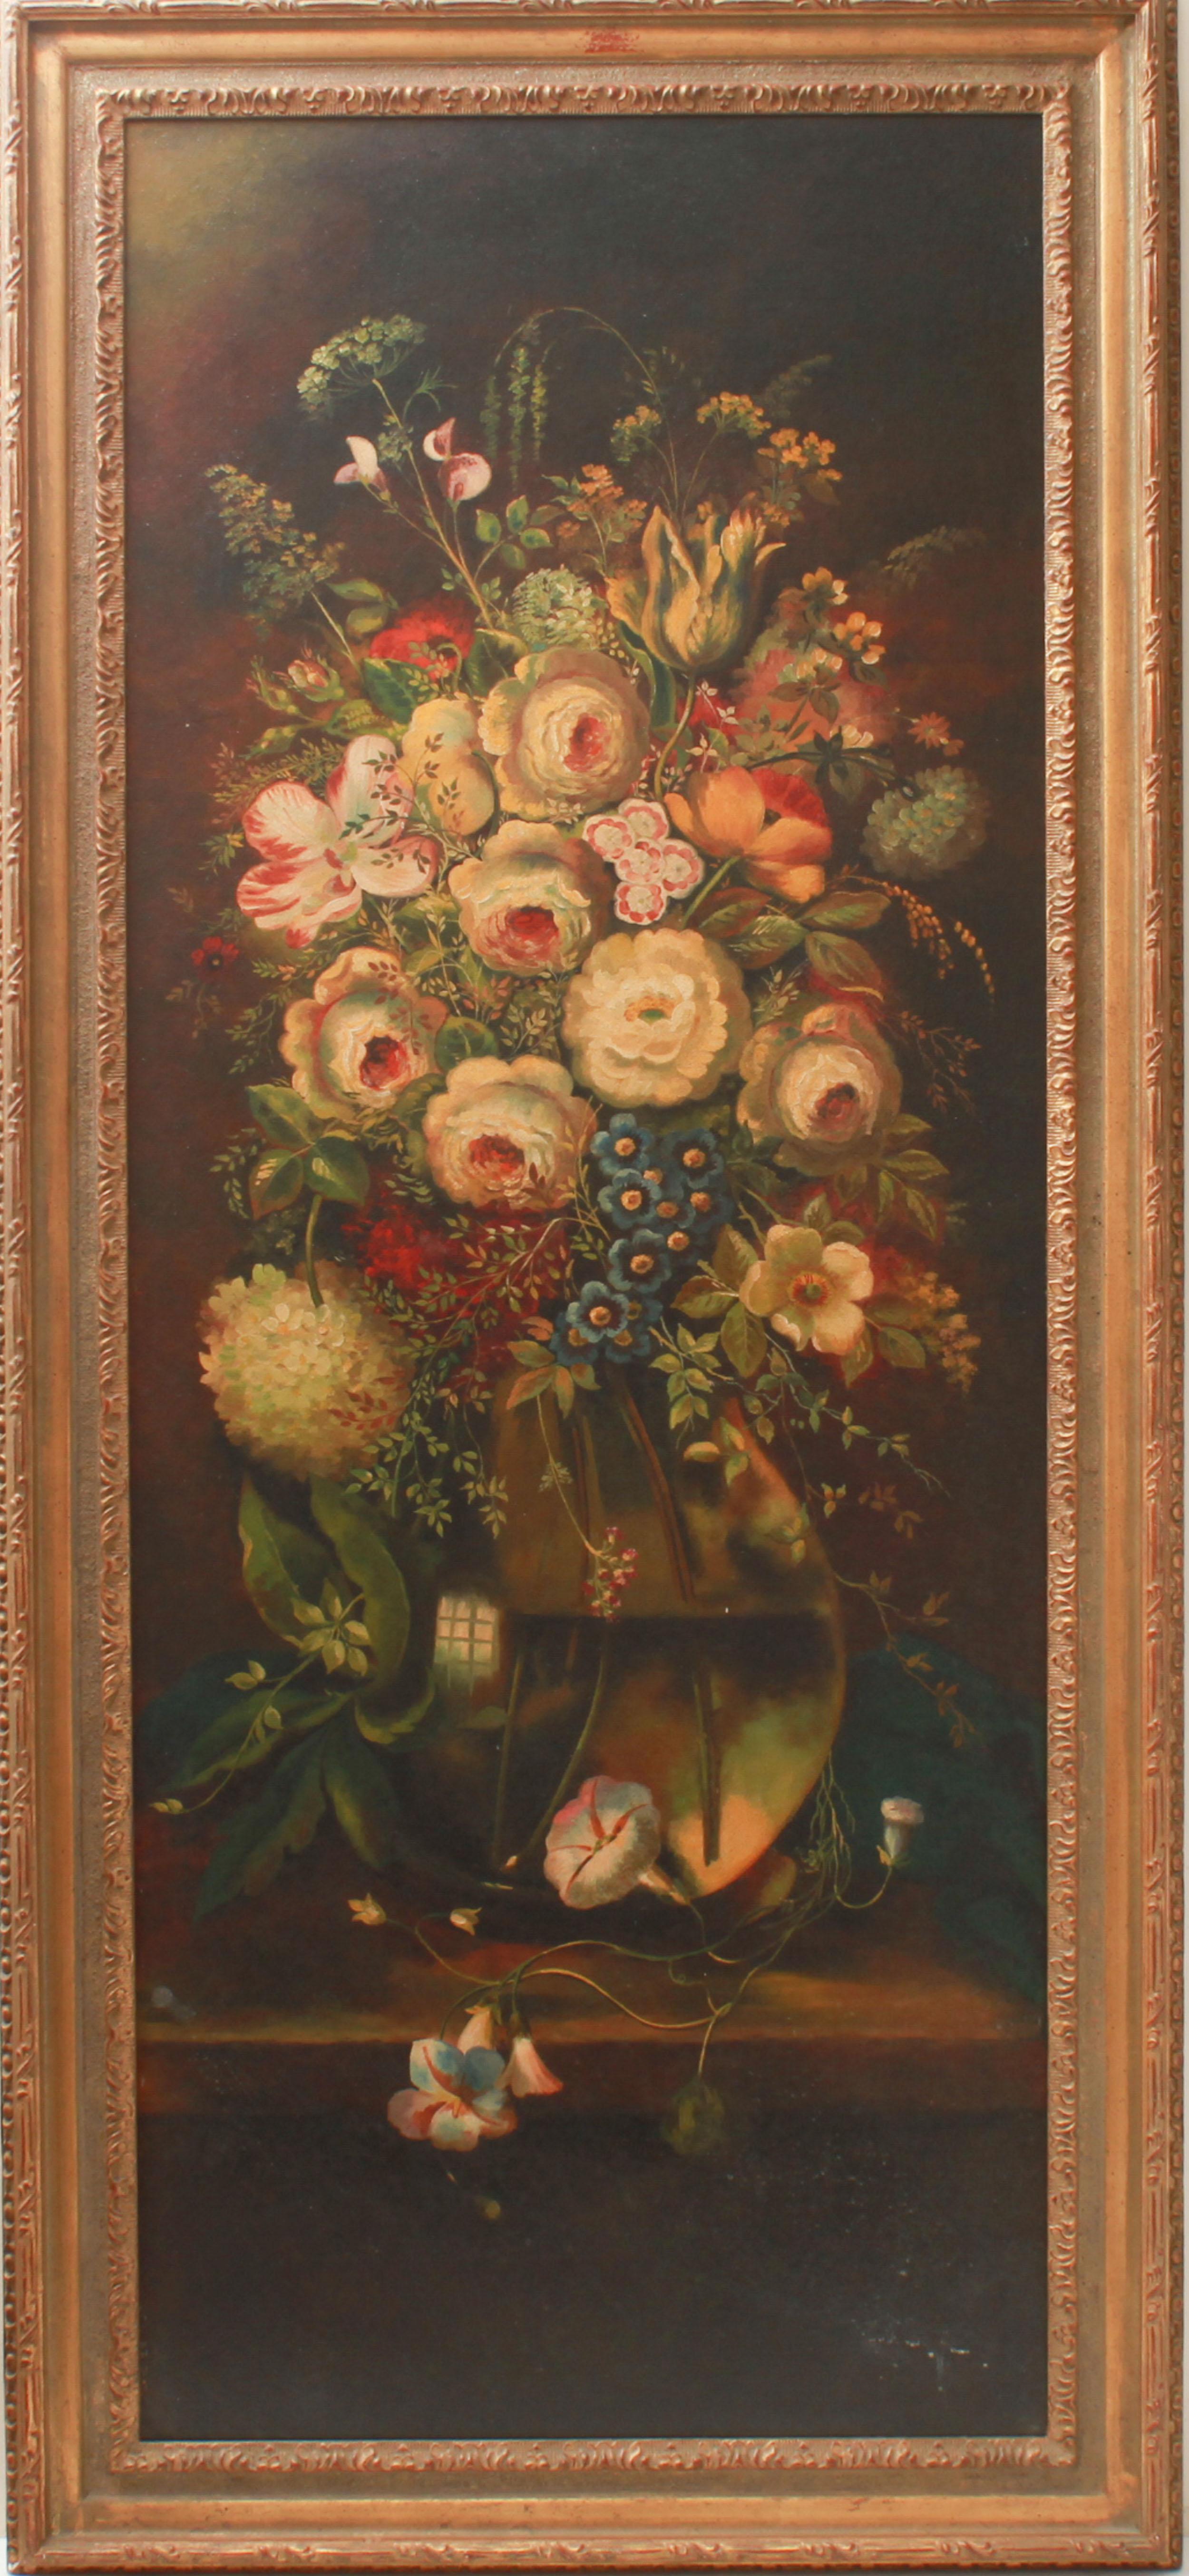 Continental manner pair of matching still life paintings depicting floral bouquets in glass vase and urn, oil on board. Made in the 20th century. 
Image: 52.75